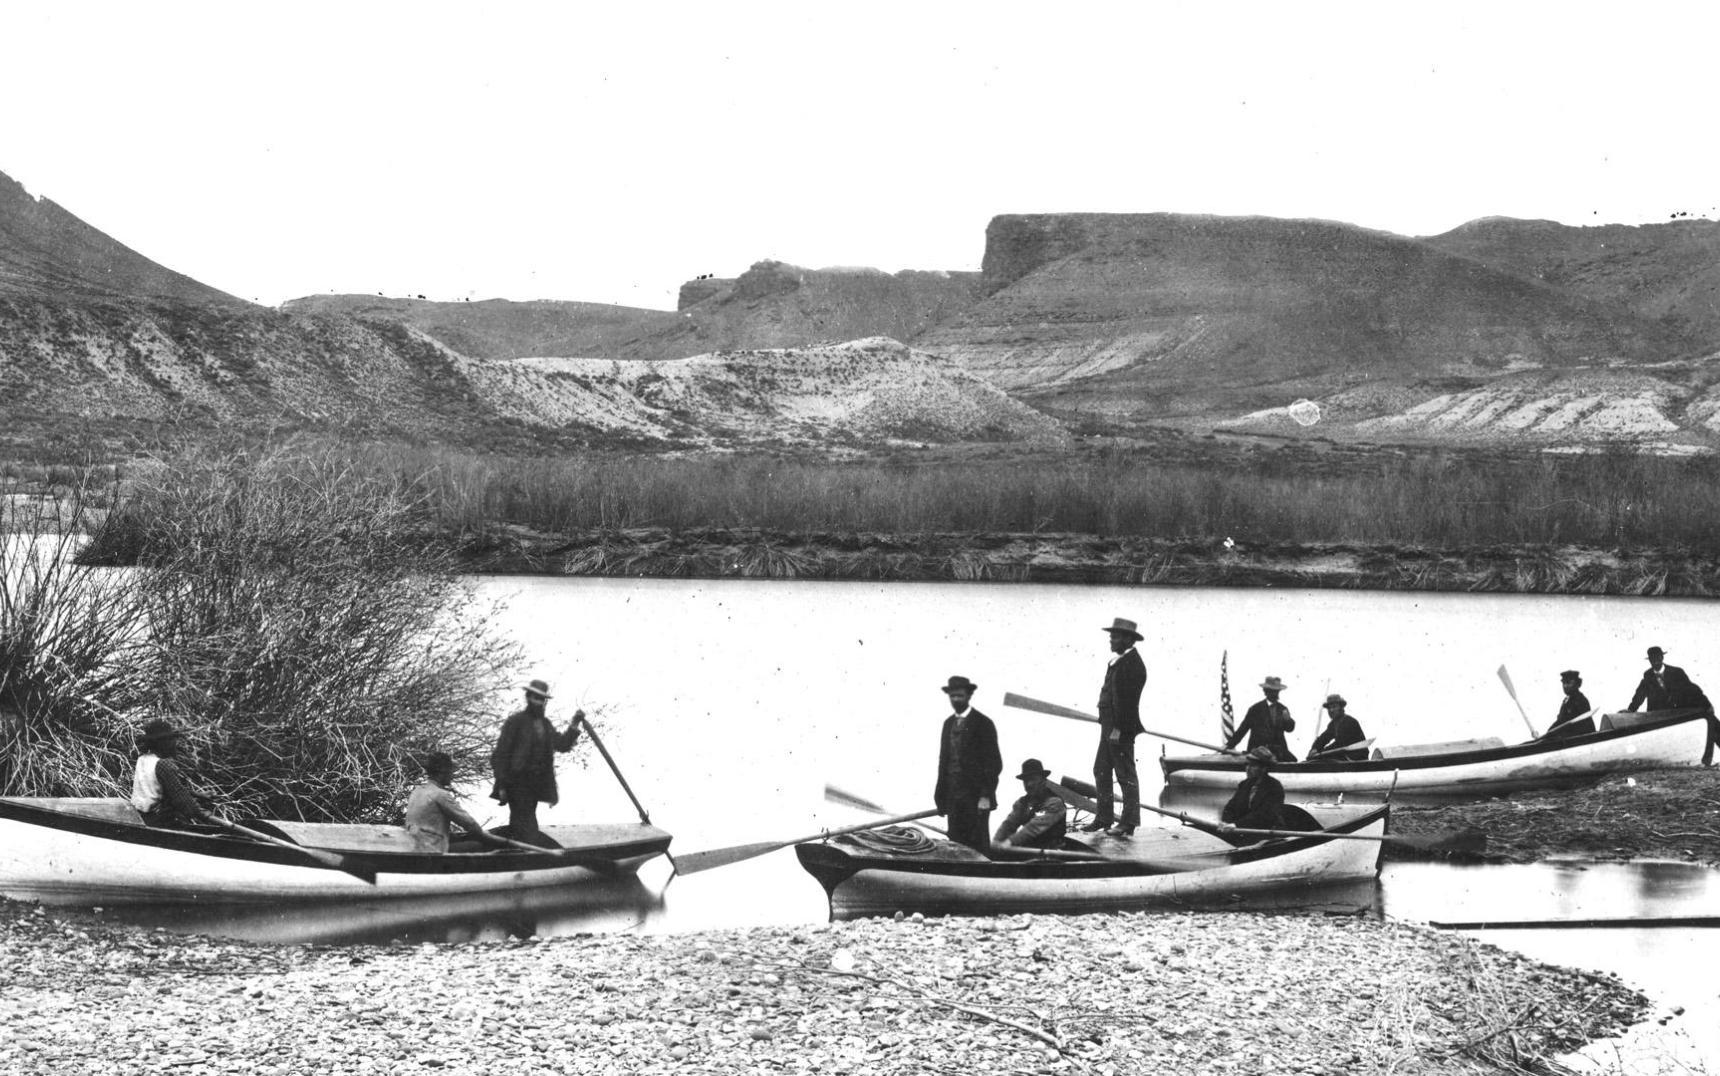 Photo of John Wesley Powell and friends on boats in a river